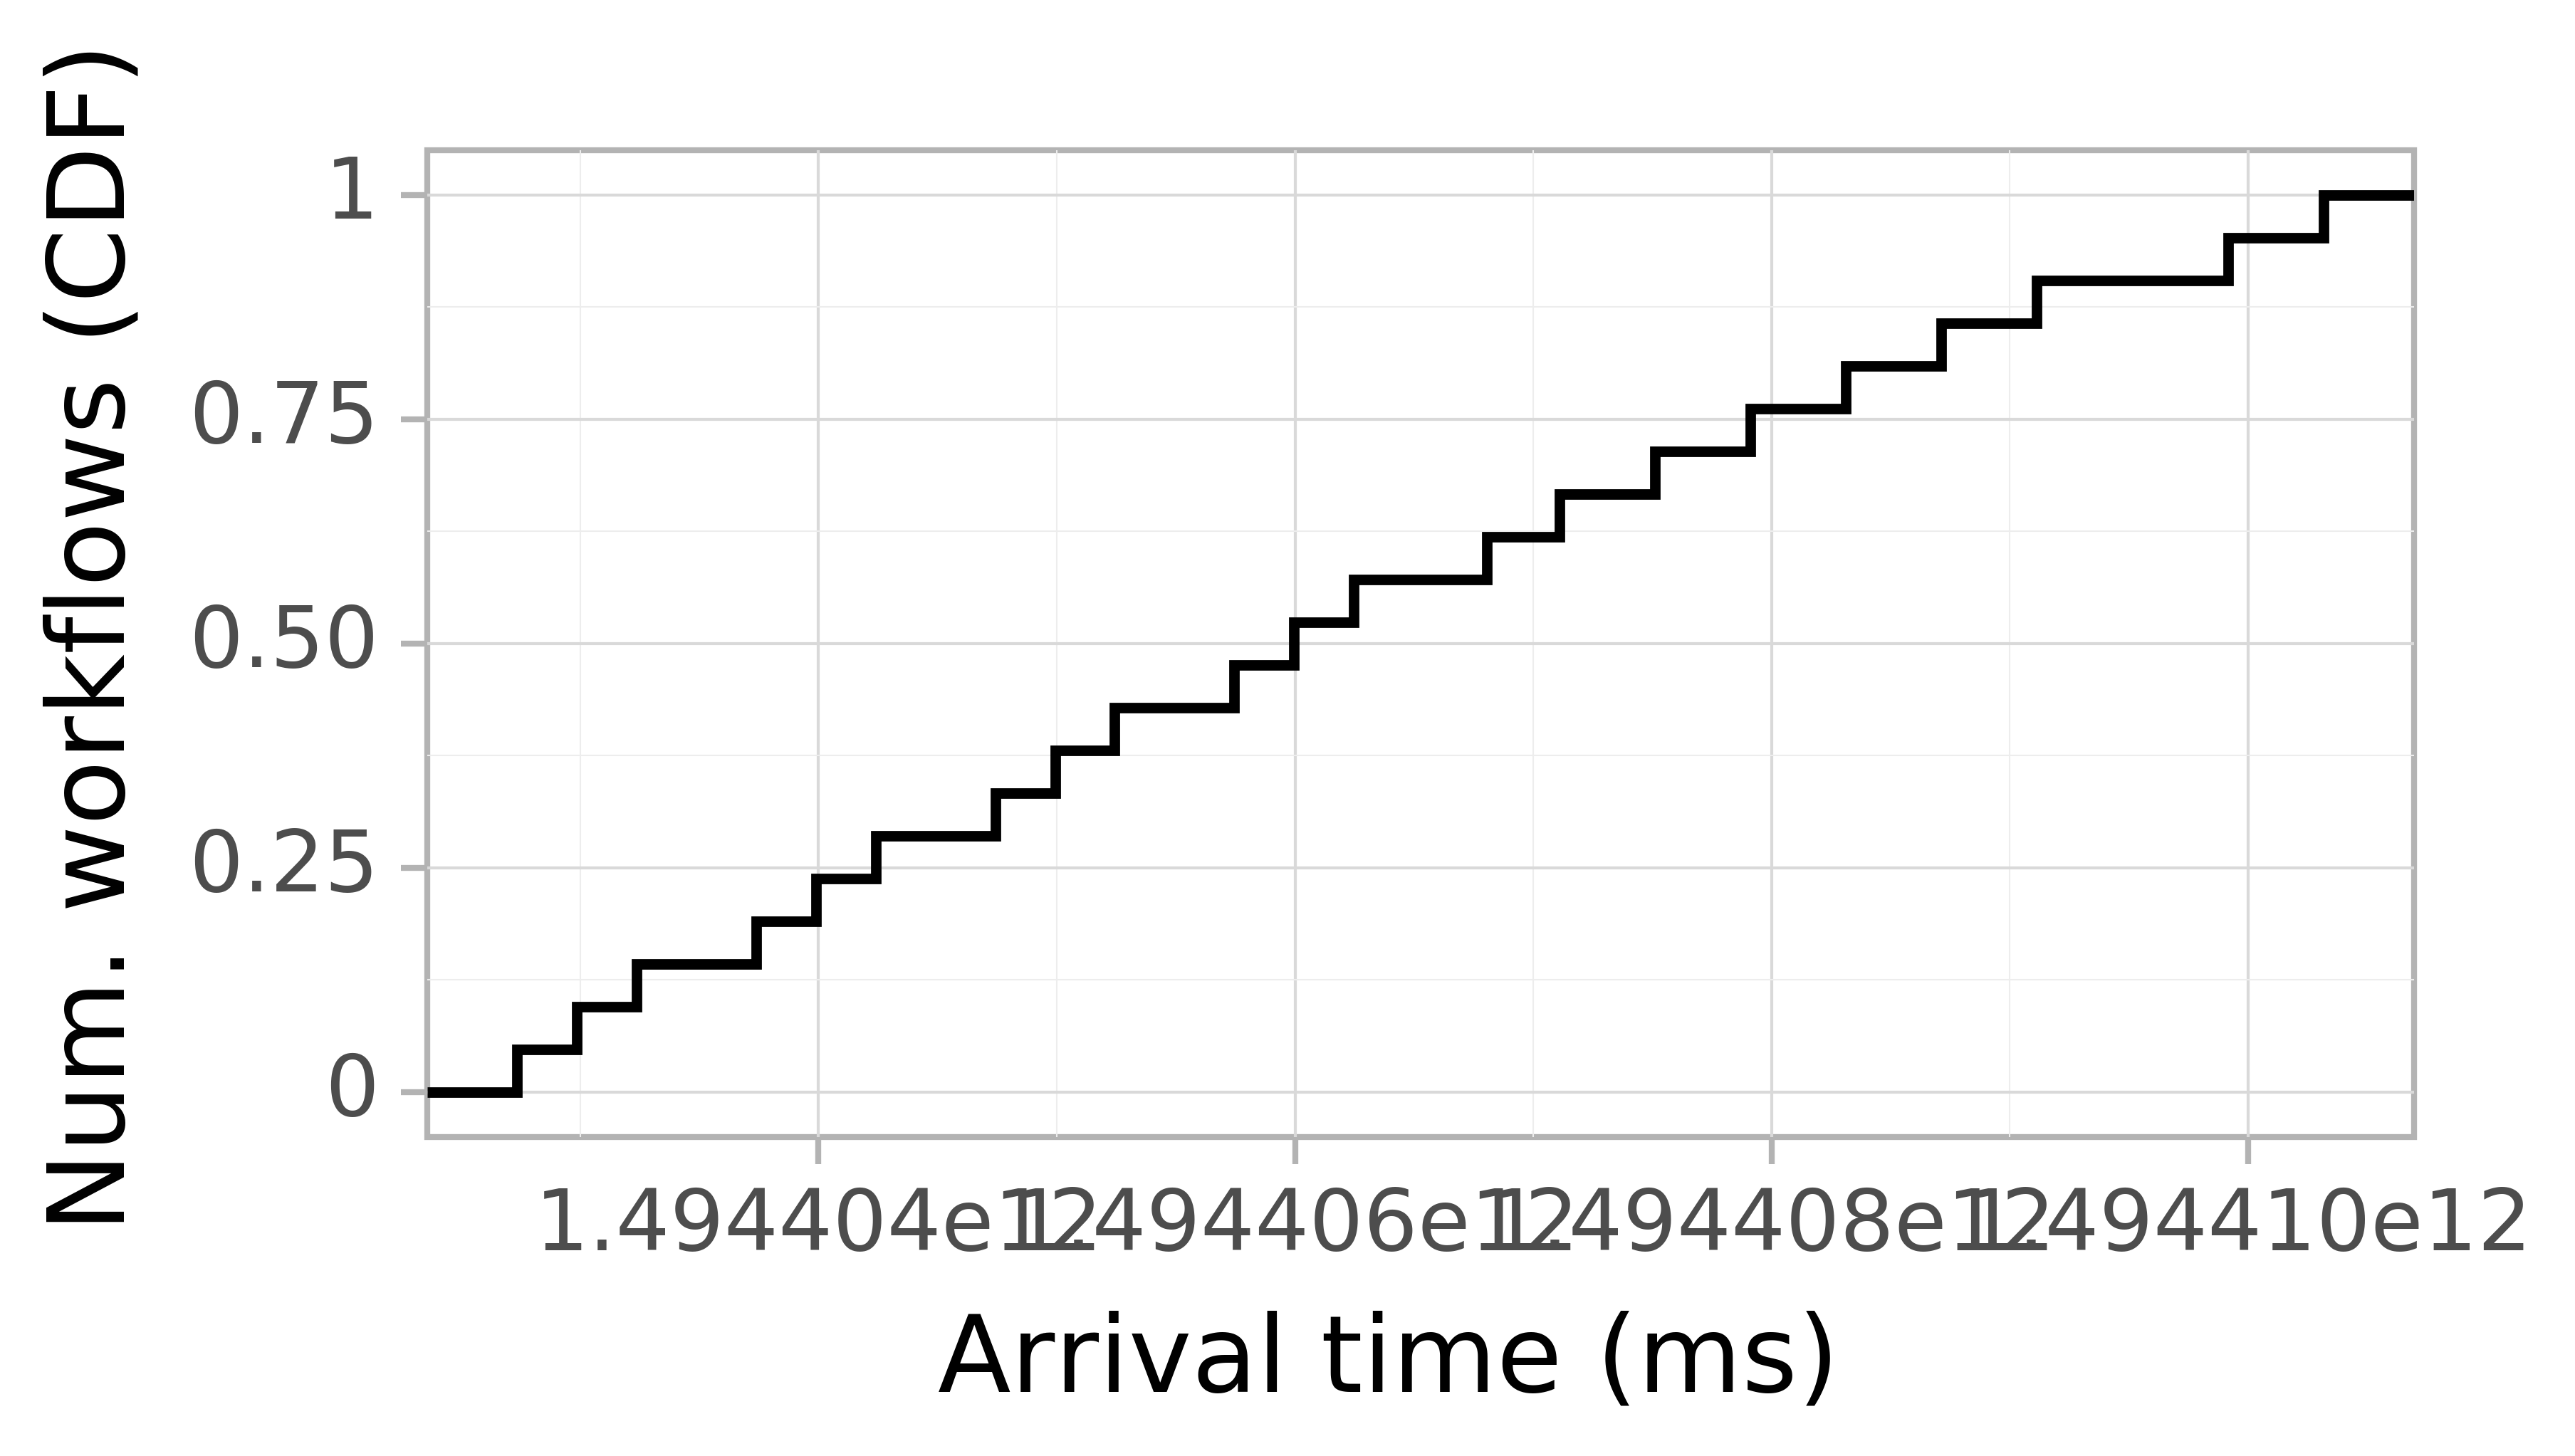 Job arrival CDF graph for the askalon-new_ee55 trace.